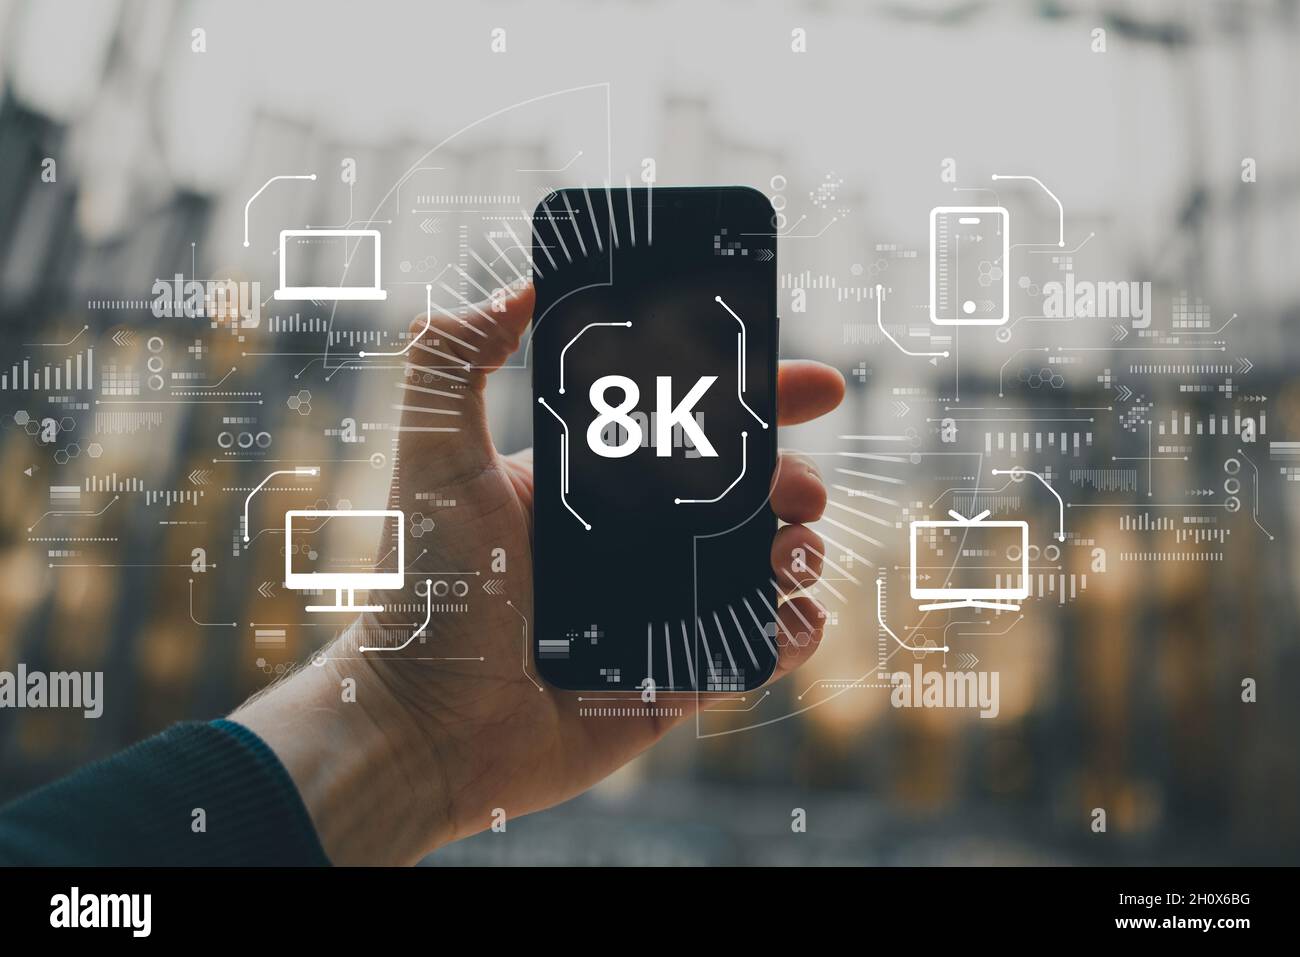 High resolution 8k concept on abstract image with hands and smartphone. Icons computer, tv and smartphone Stock Photo